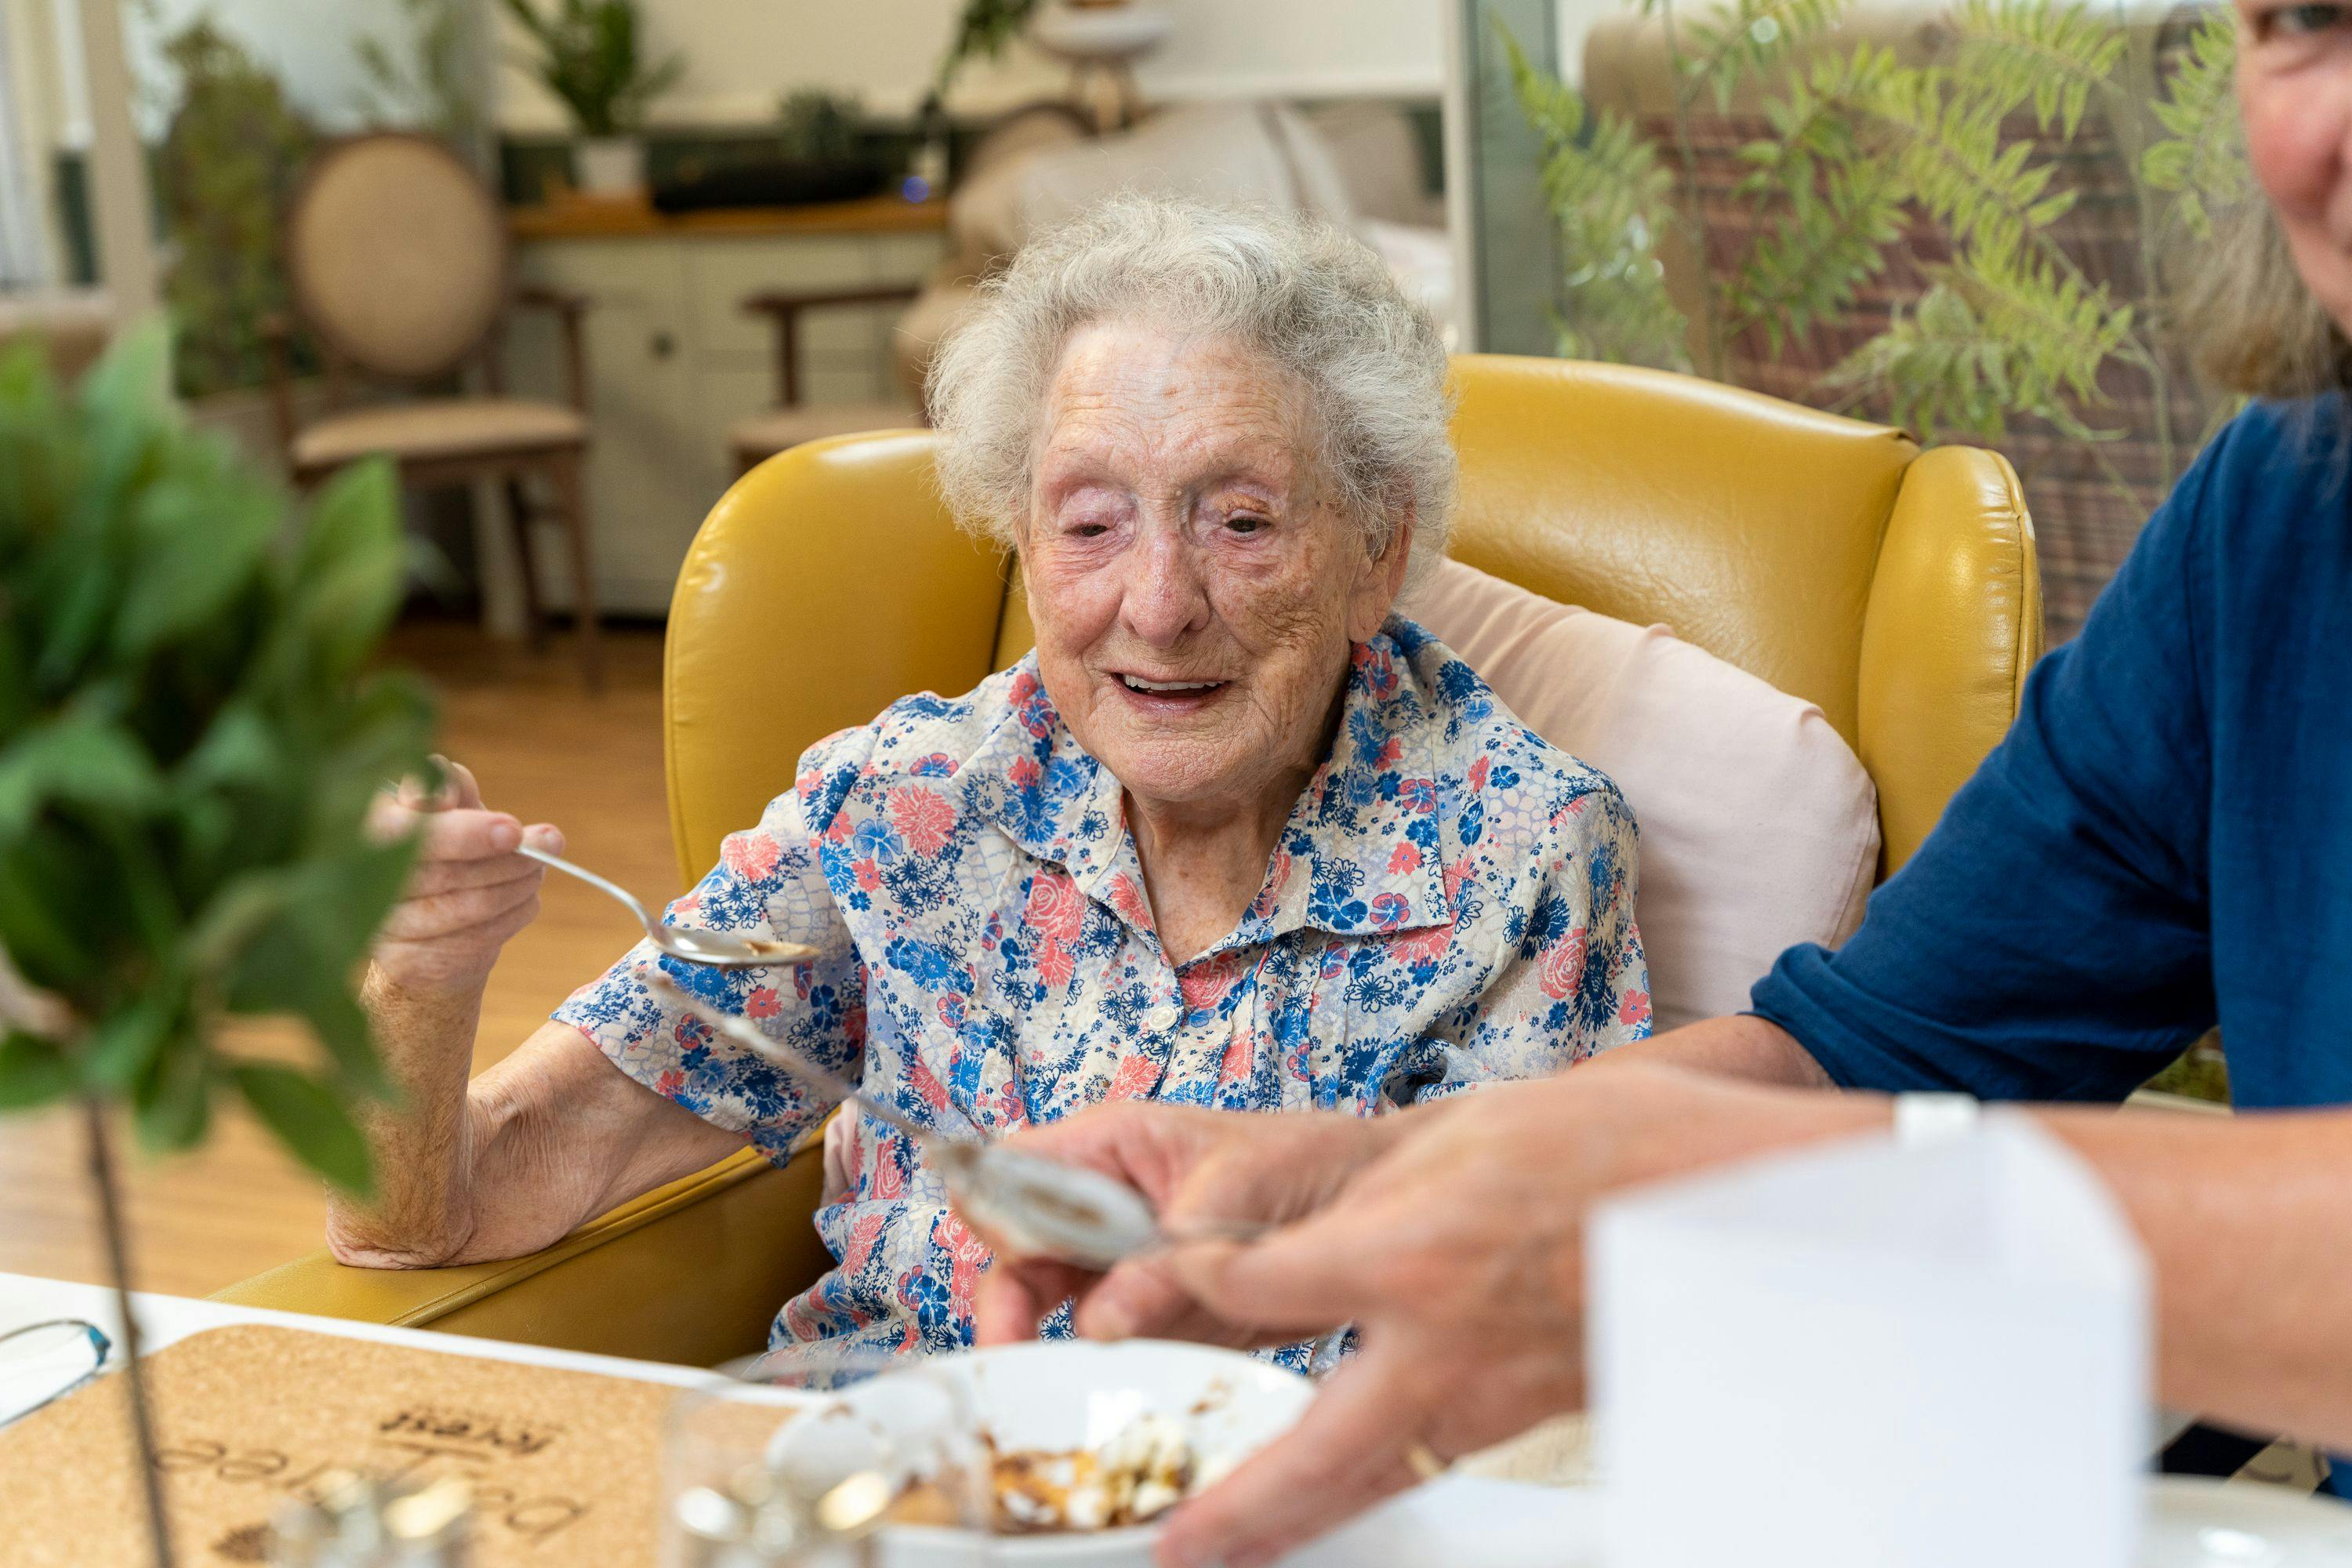 Resident of The Grange care home in Faringdon, Oxfordshire